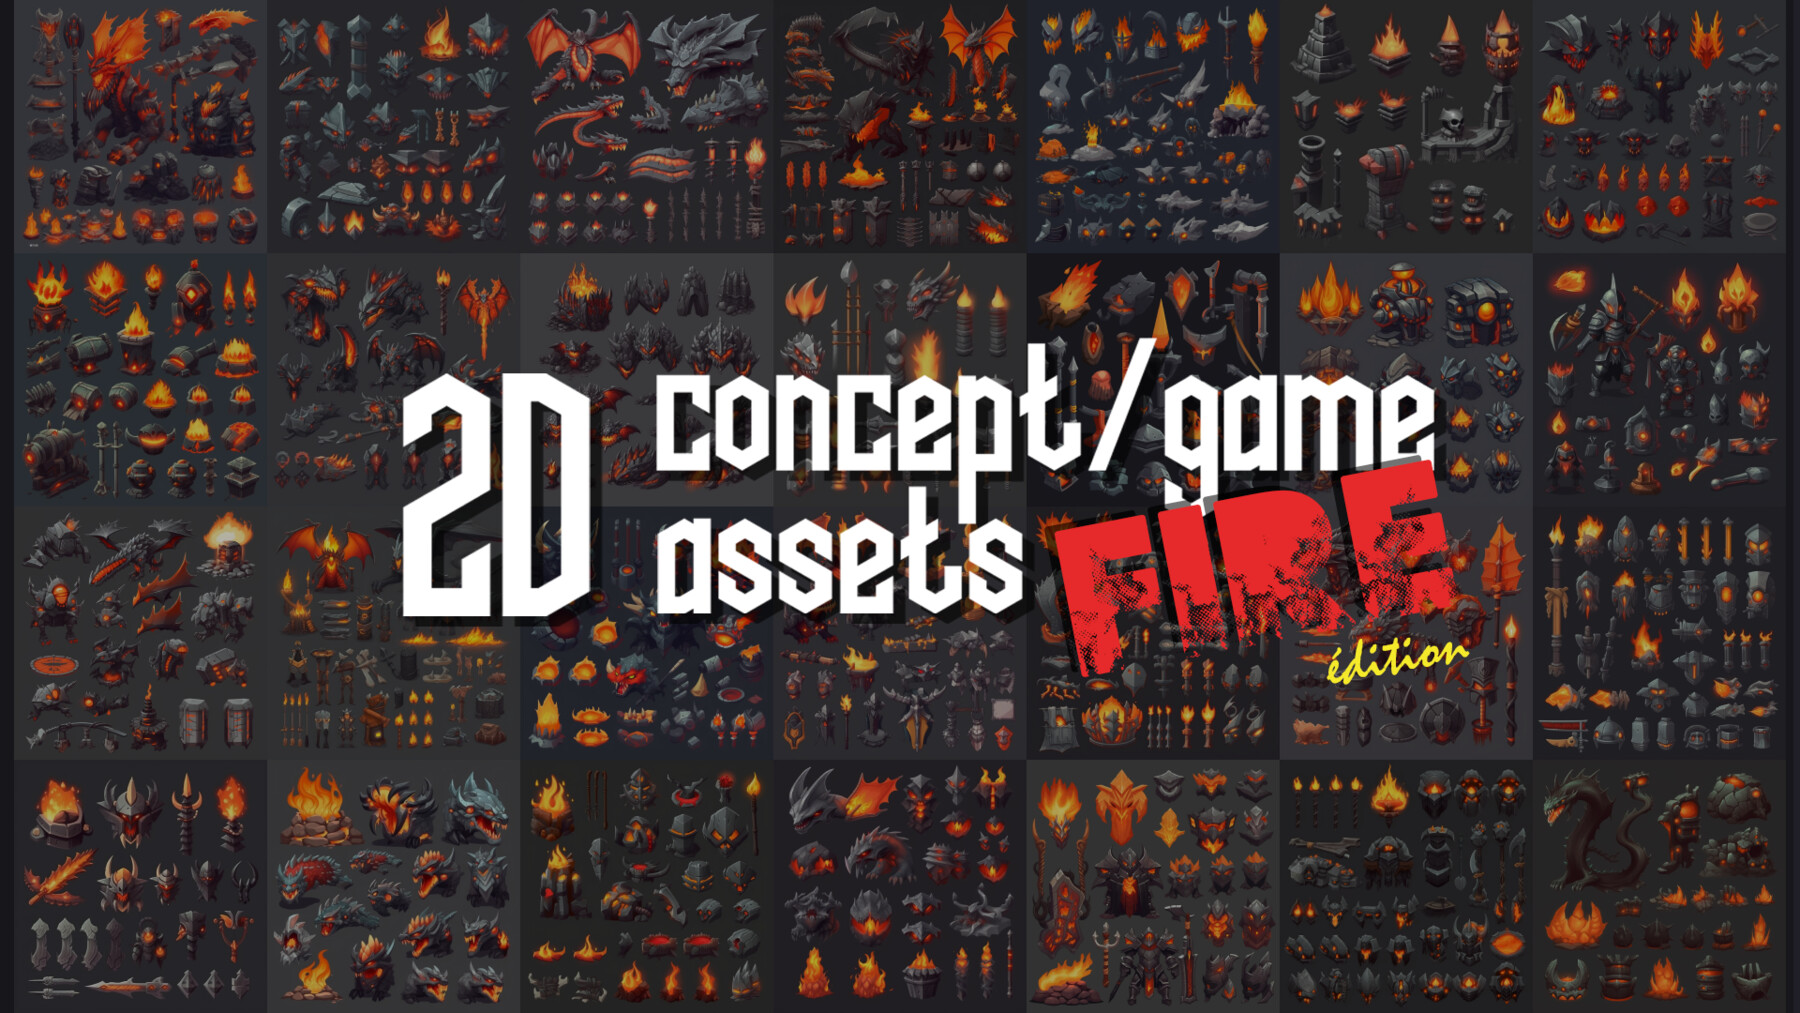 Game Assets For Game Developers